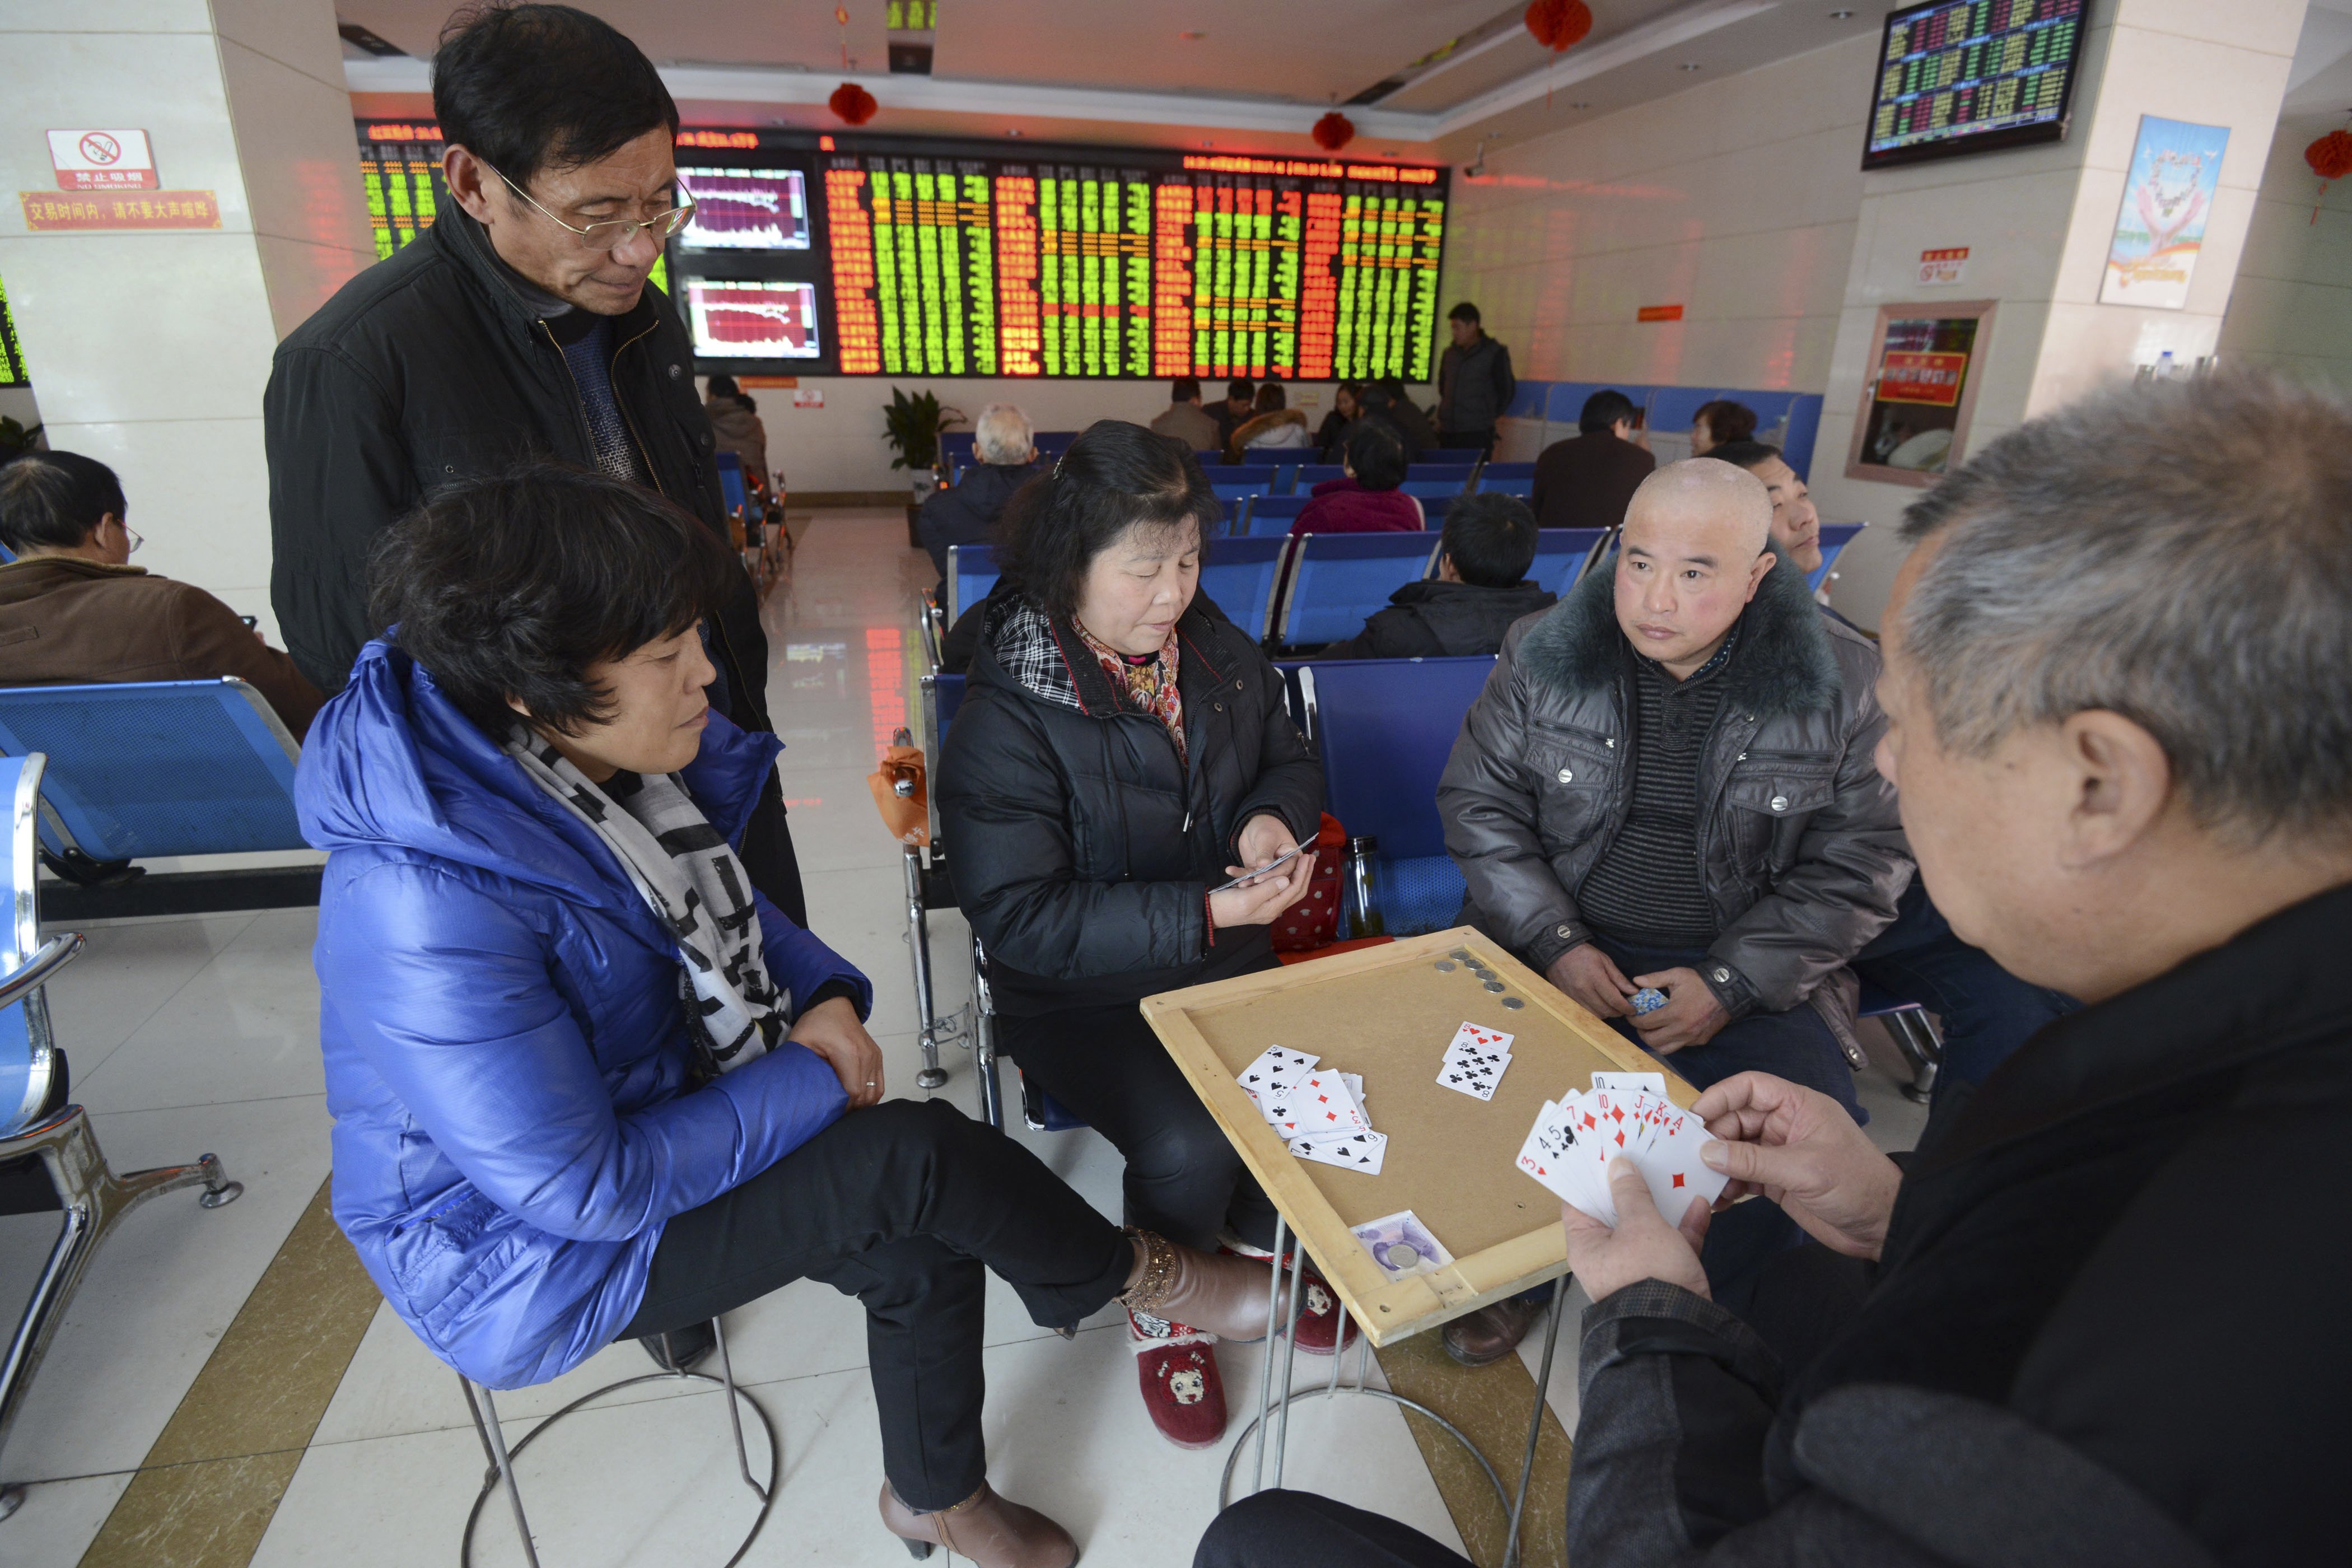 Chinese stock investors play cards at a brokerage house in Fuyang in central China's Anhui province Friday, Nov. 27, 2015. China's stock market fell sharply Friday as investigations into the securities industry widened to include two top brokerages. (Chinatopix via AP) CHINA OUT